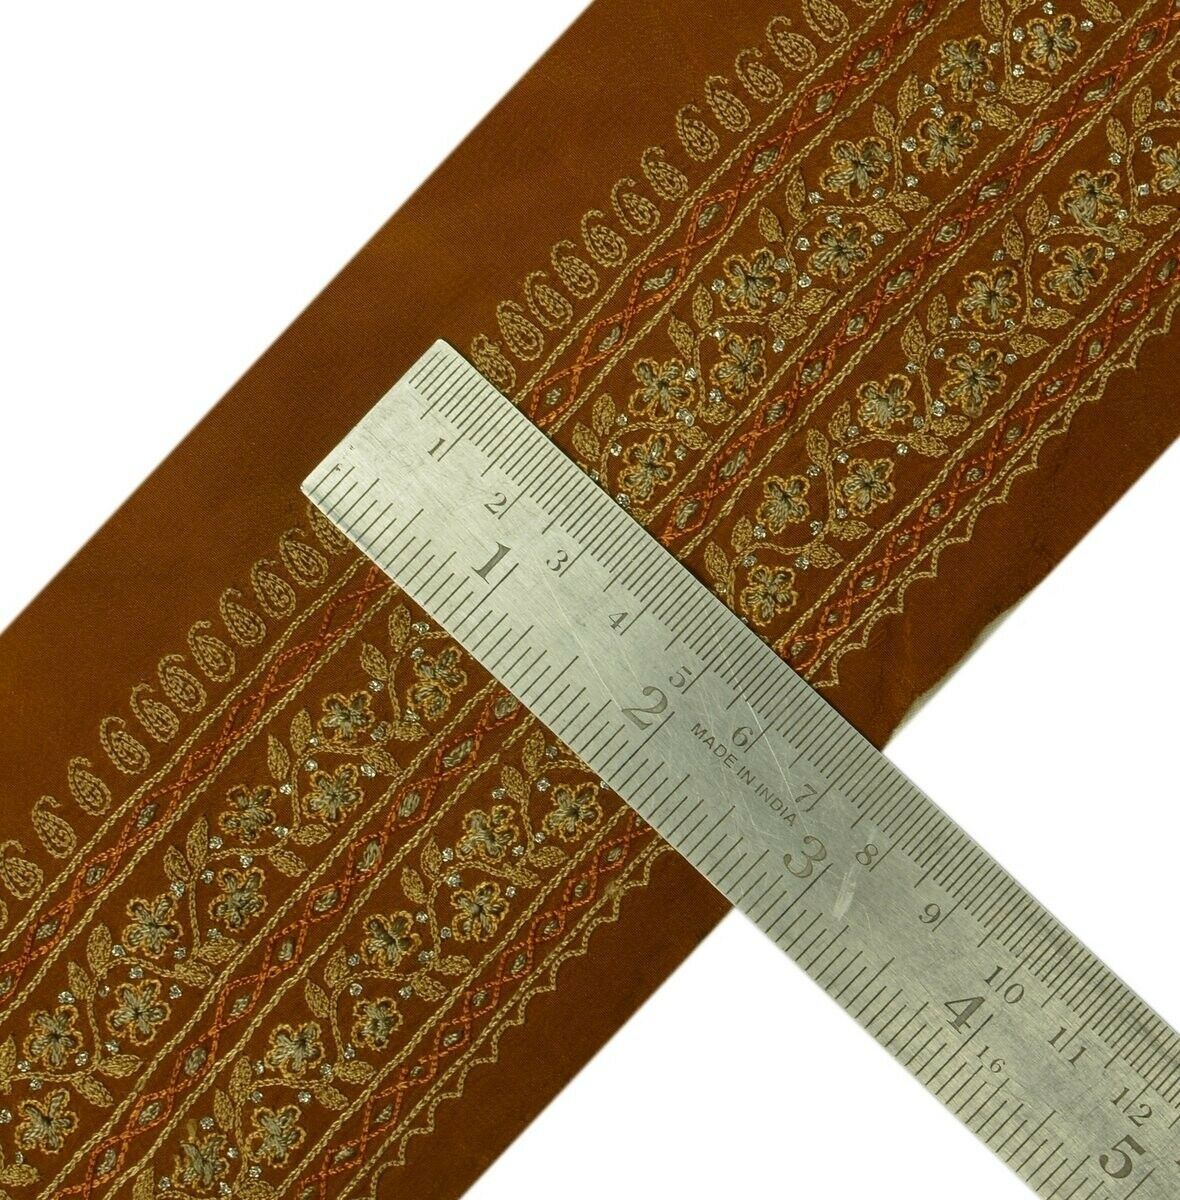 Vintage Sari Border Indian Craft Trim Hand Embroidered Sewing Ribbon Lace